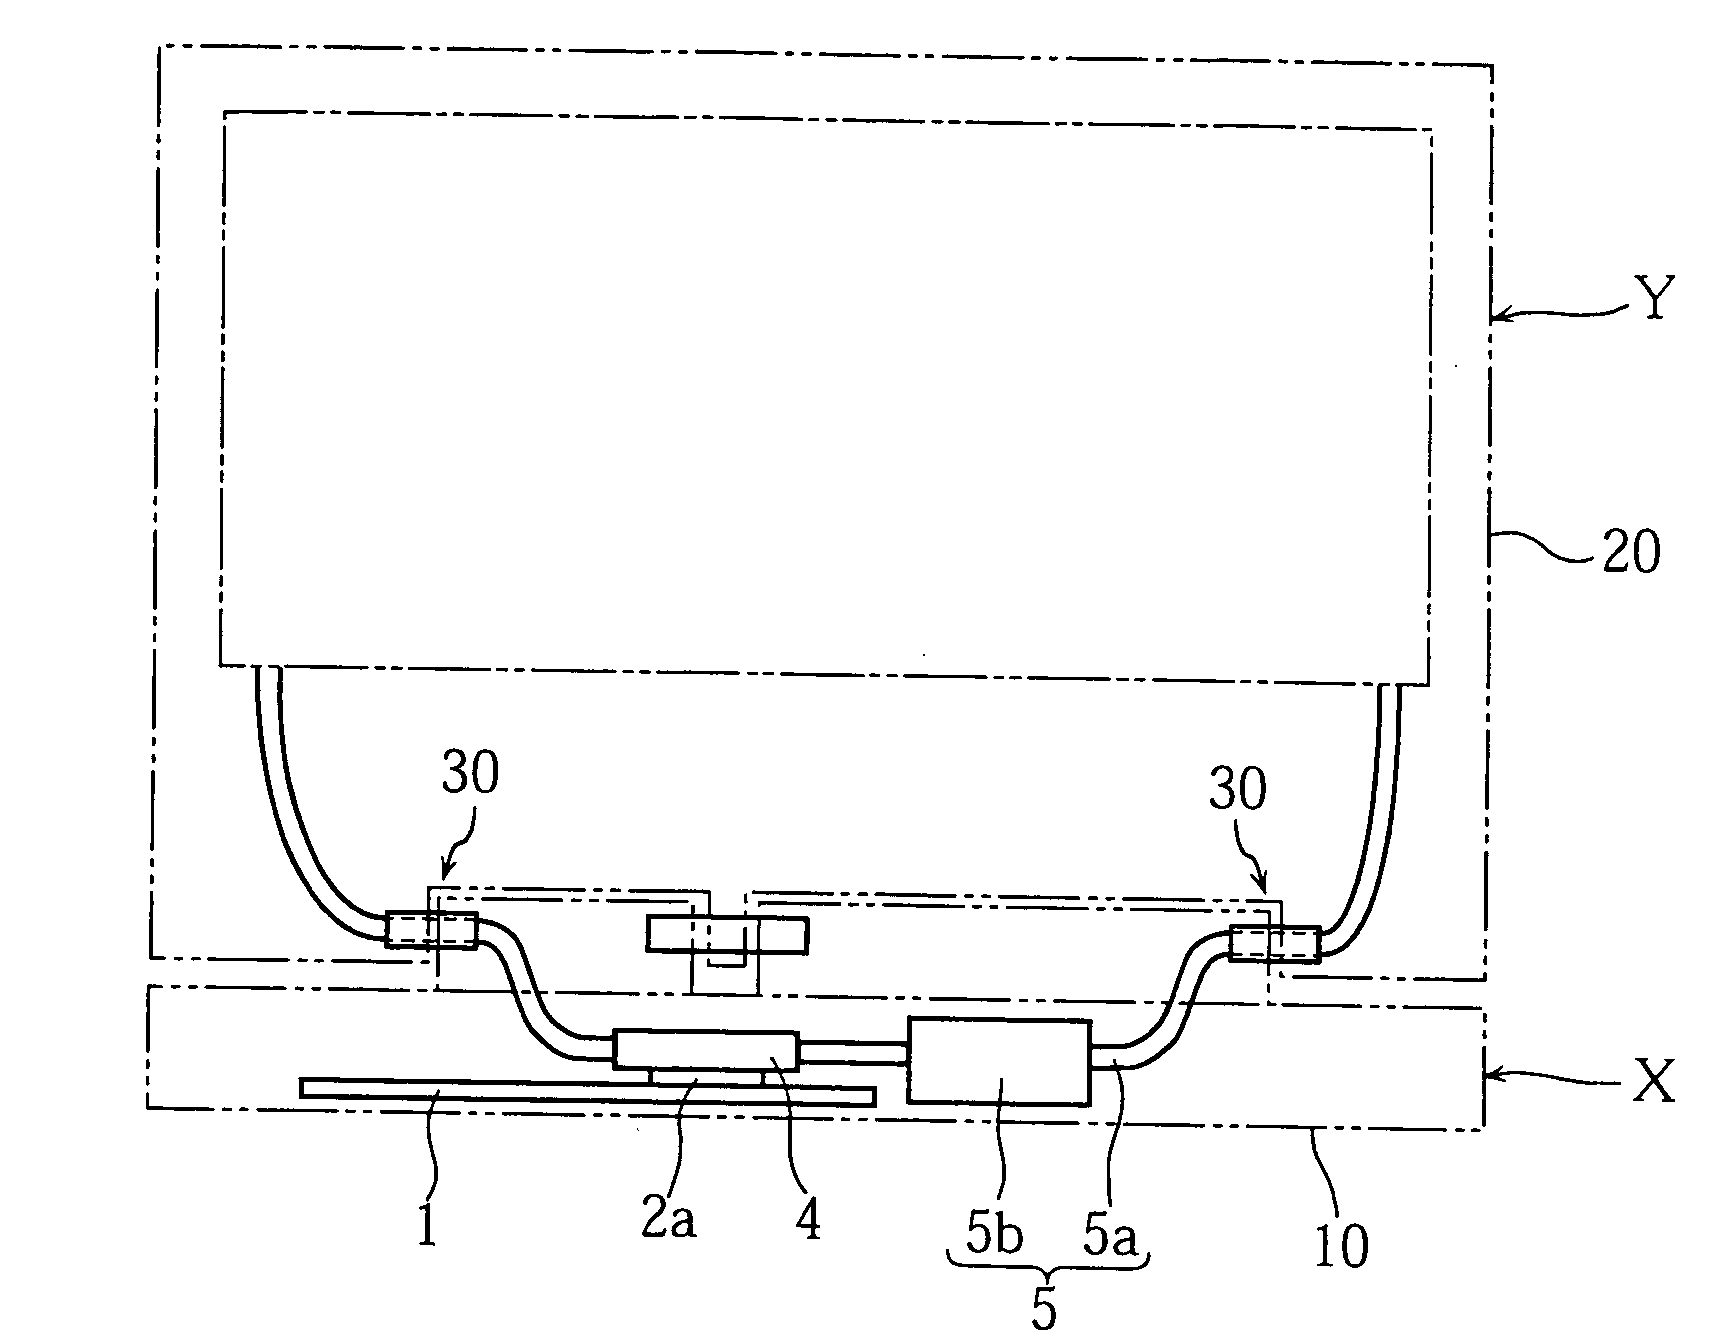 Cooling structure for electronic equipment